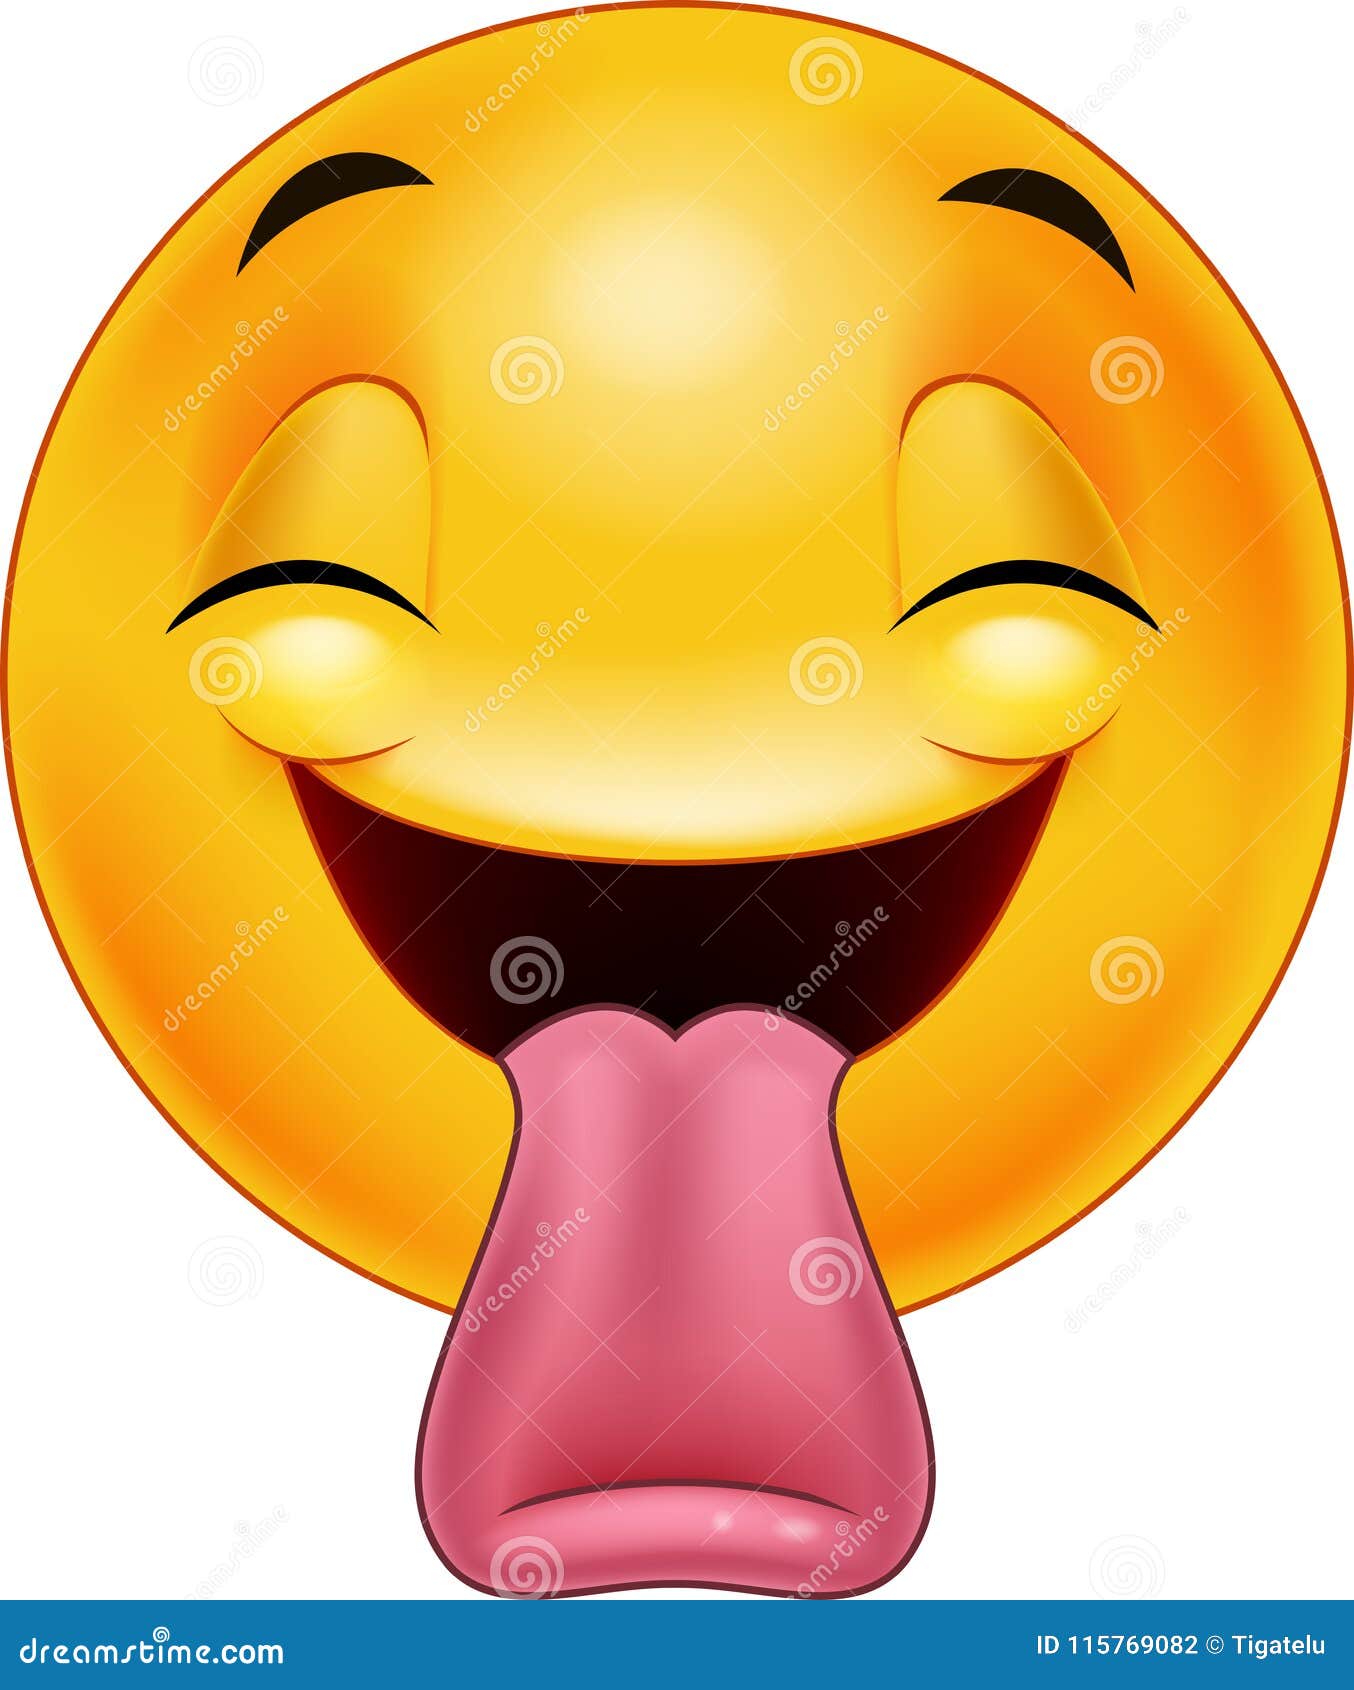 smiley face with tongue sticking out emoticon